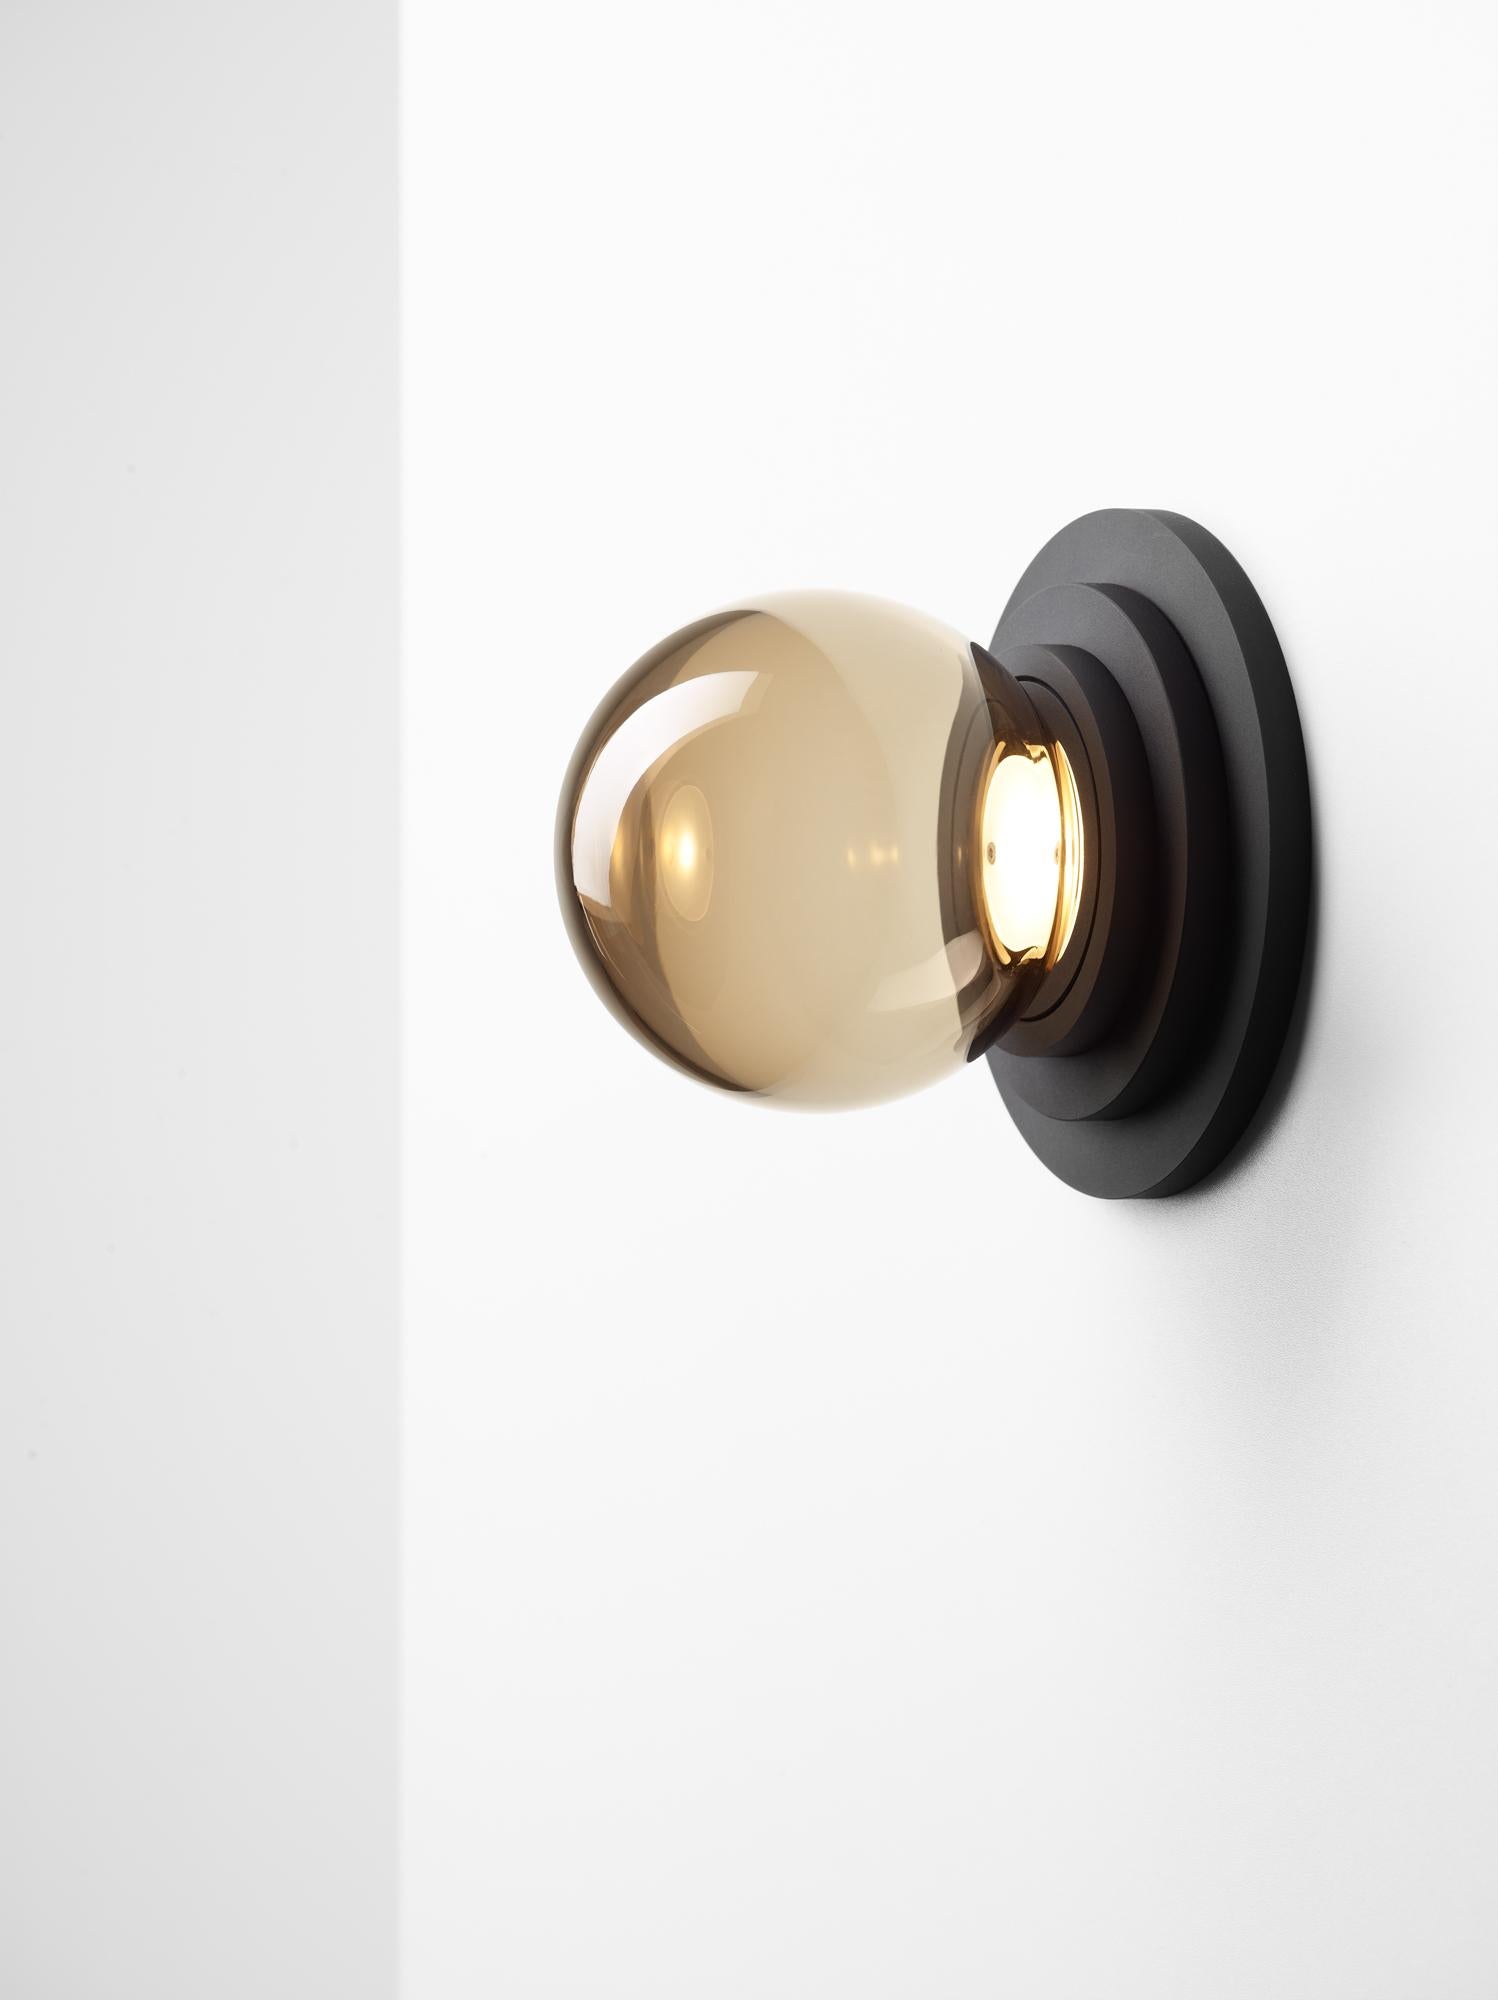 Black Stratos mini ball wall light by Dechem Studio
Dimensions: D 12 x H 14 cm
Materials: Aluminum, glass.
Also available: Different colours available

Different shapes of capsules and spheres contrast with anodized alloy fixtures, creating a